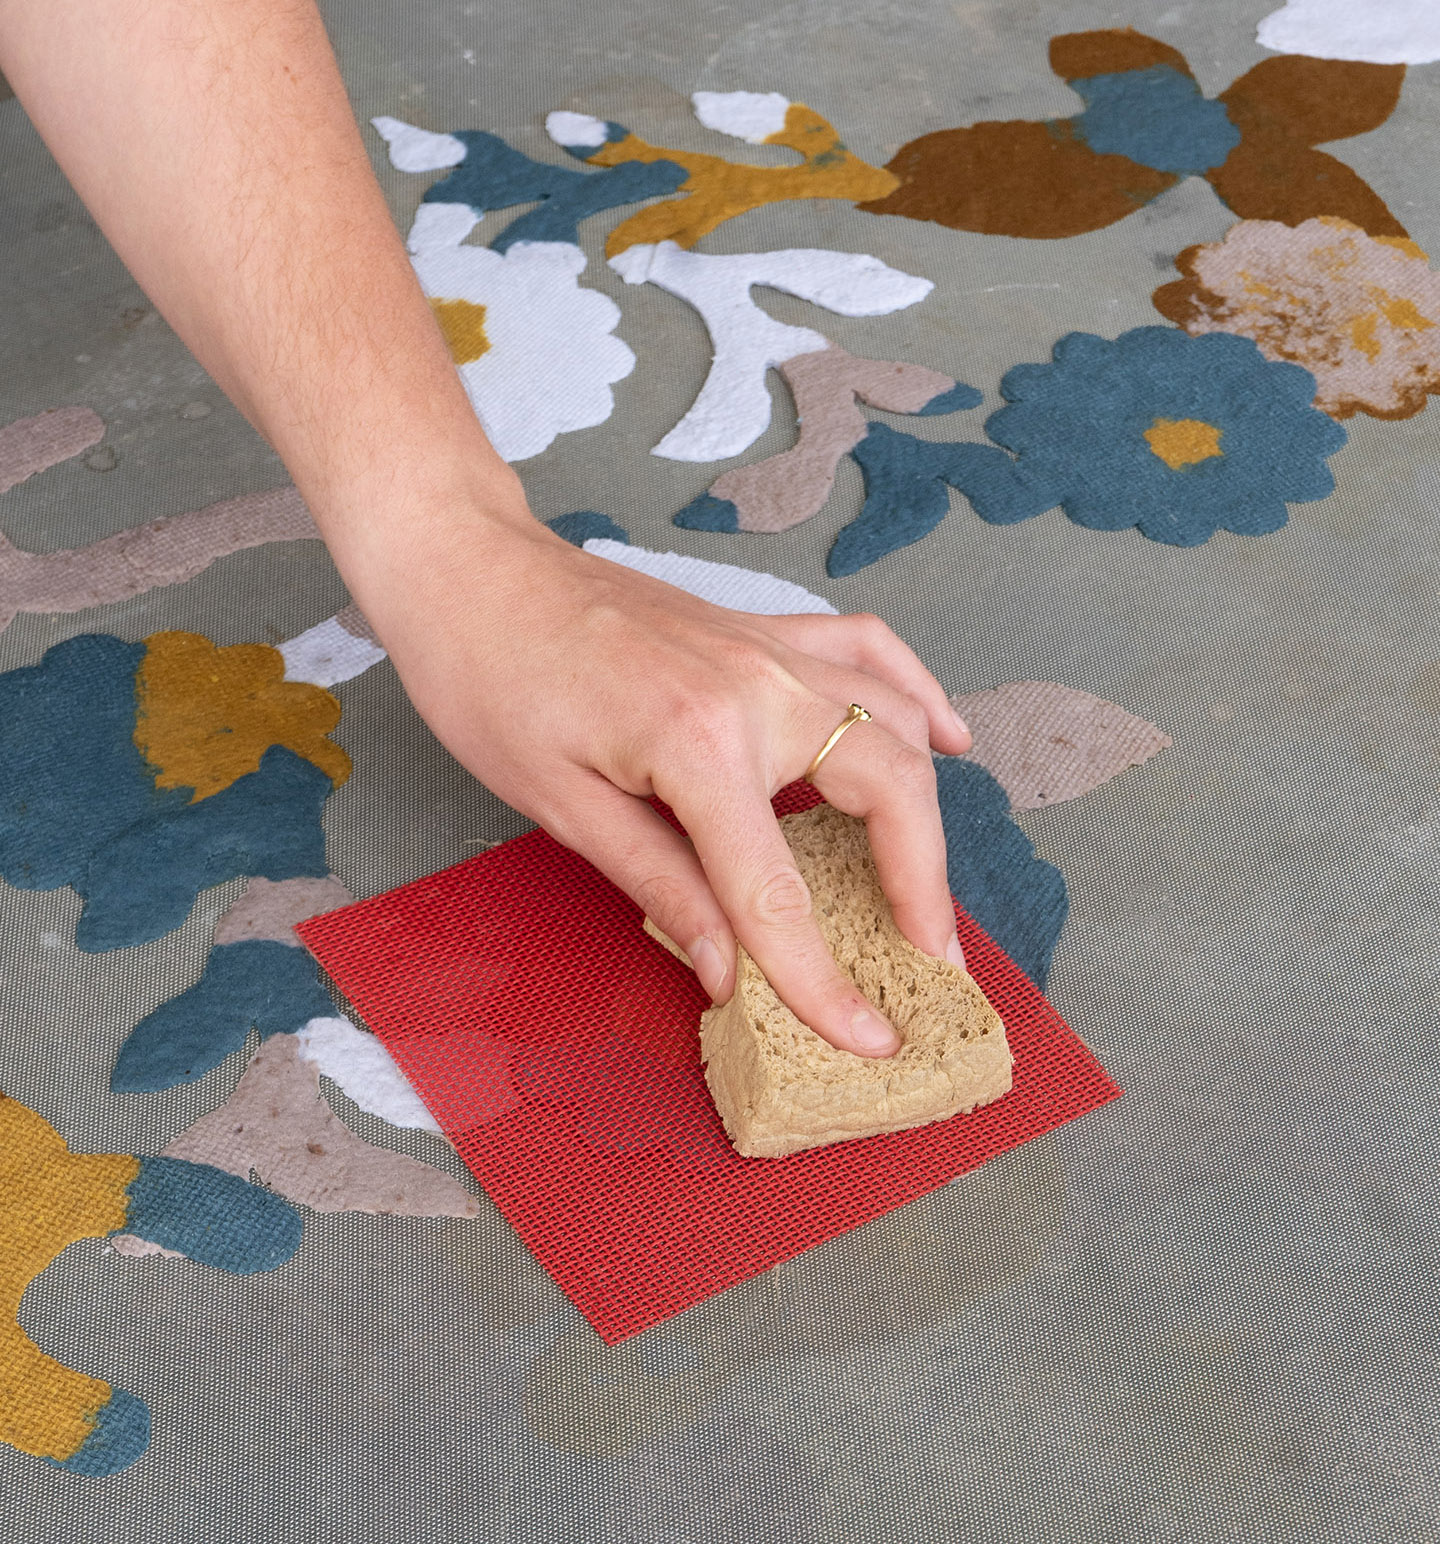 hand pressing a sponge to absorb the water from the recycled paper landscape in the making